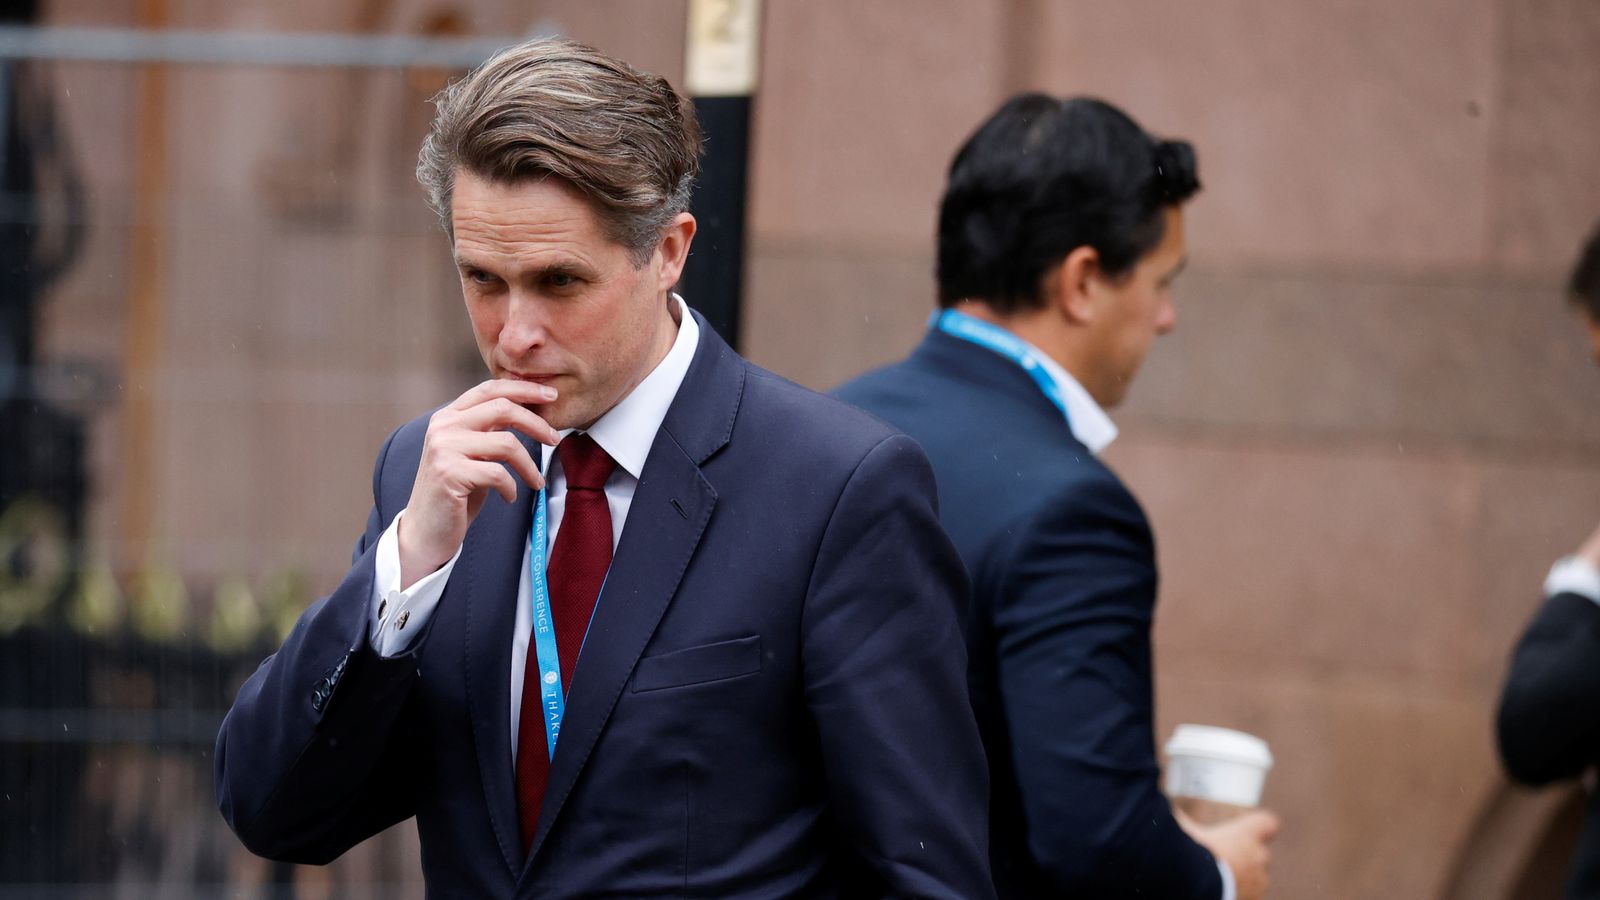 Sir Gavin Williamson's charge sheet was getting longer and the PM lost patience - the departure was inevitable